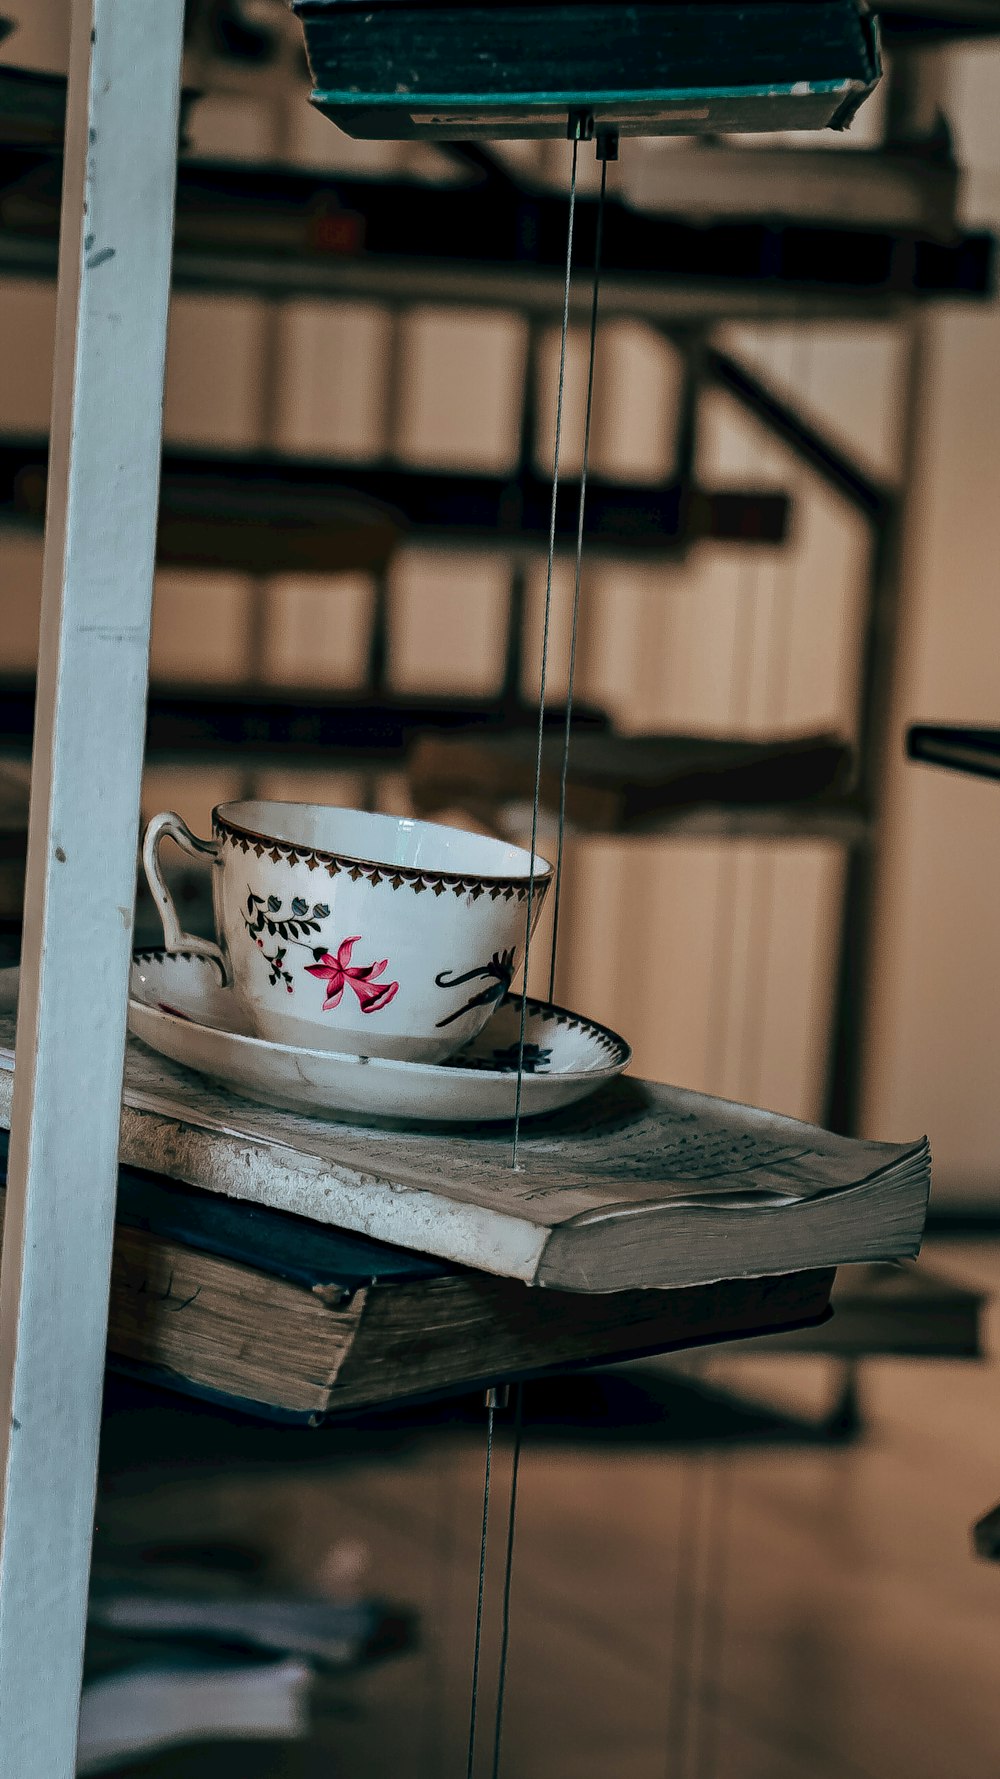 a tea cup on a table with a book